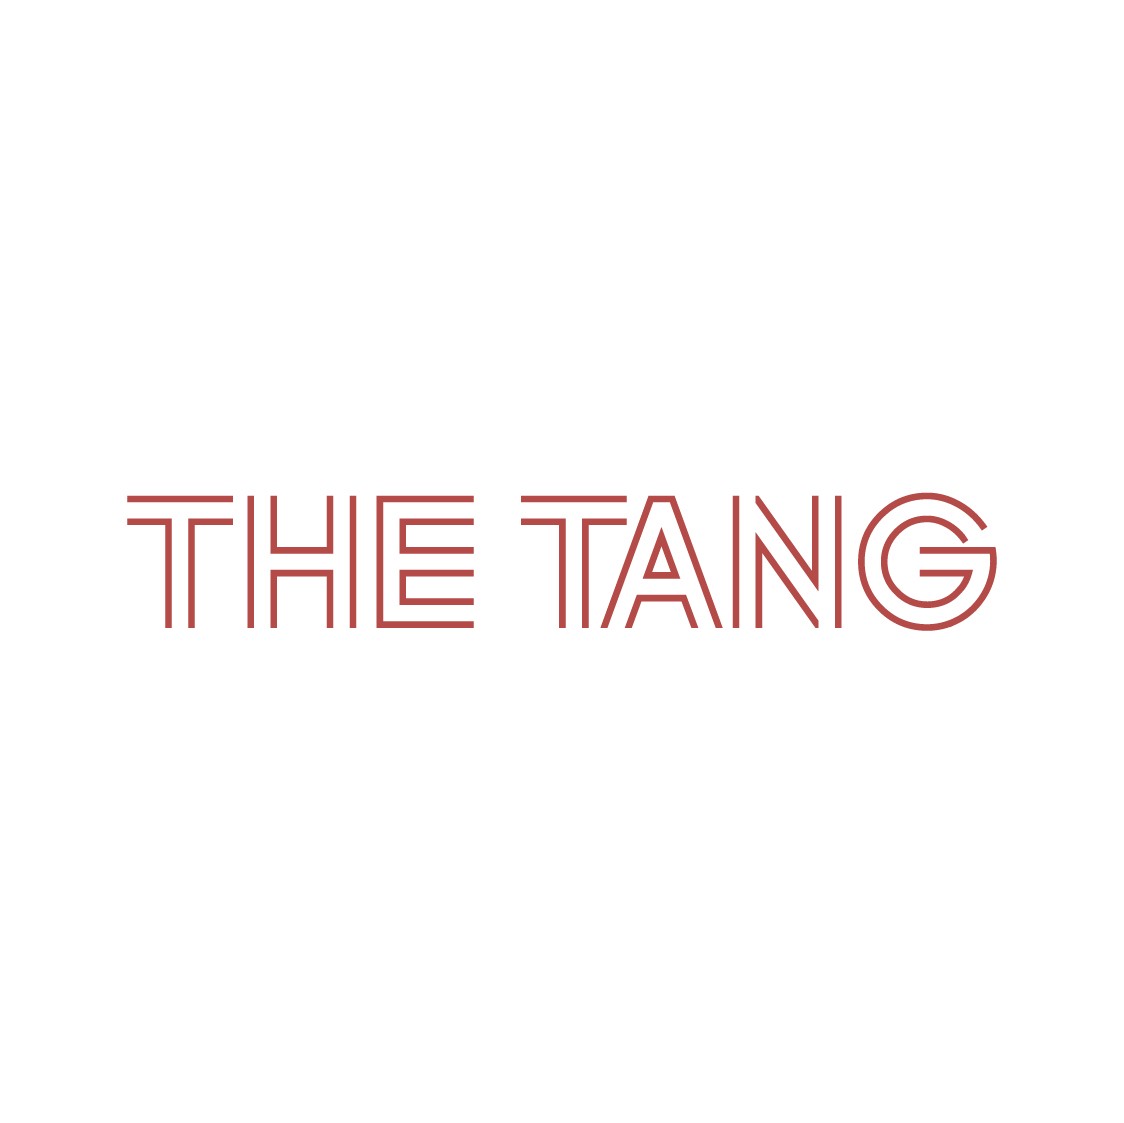 The Tang 920 amsterdam ave